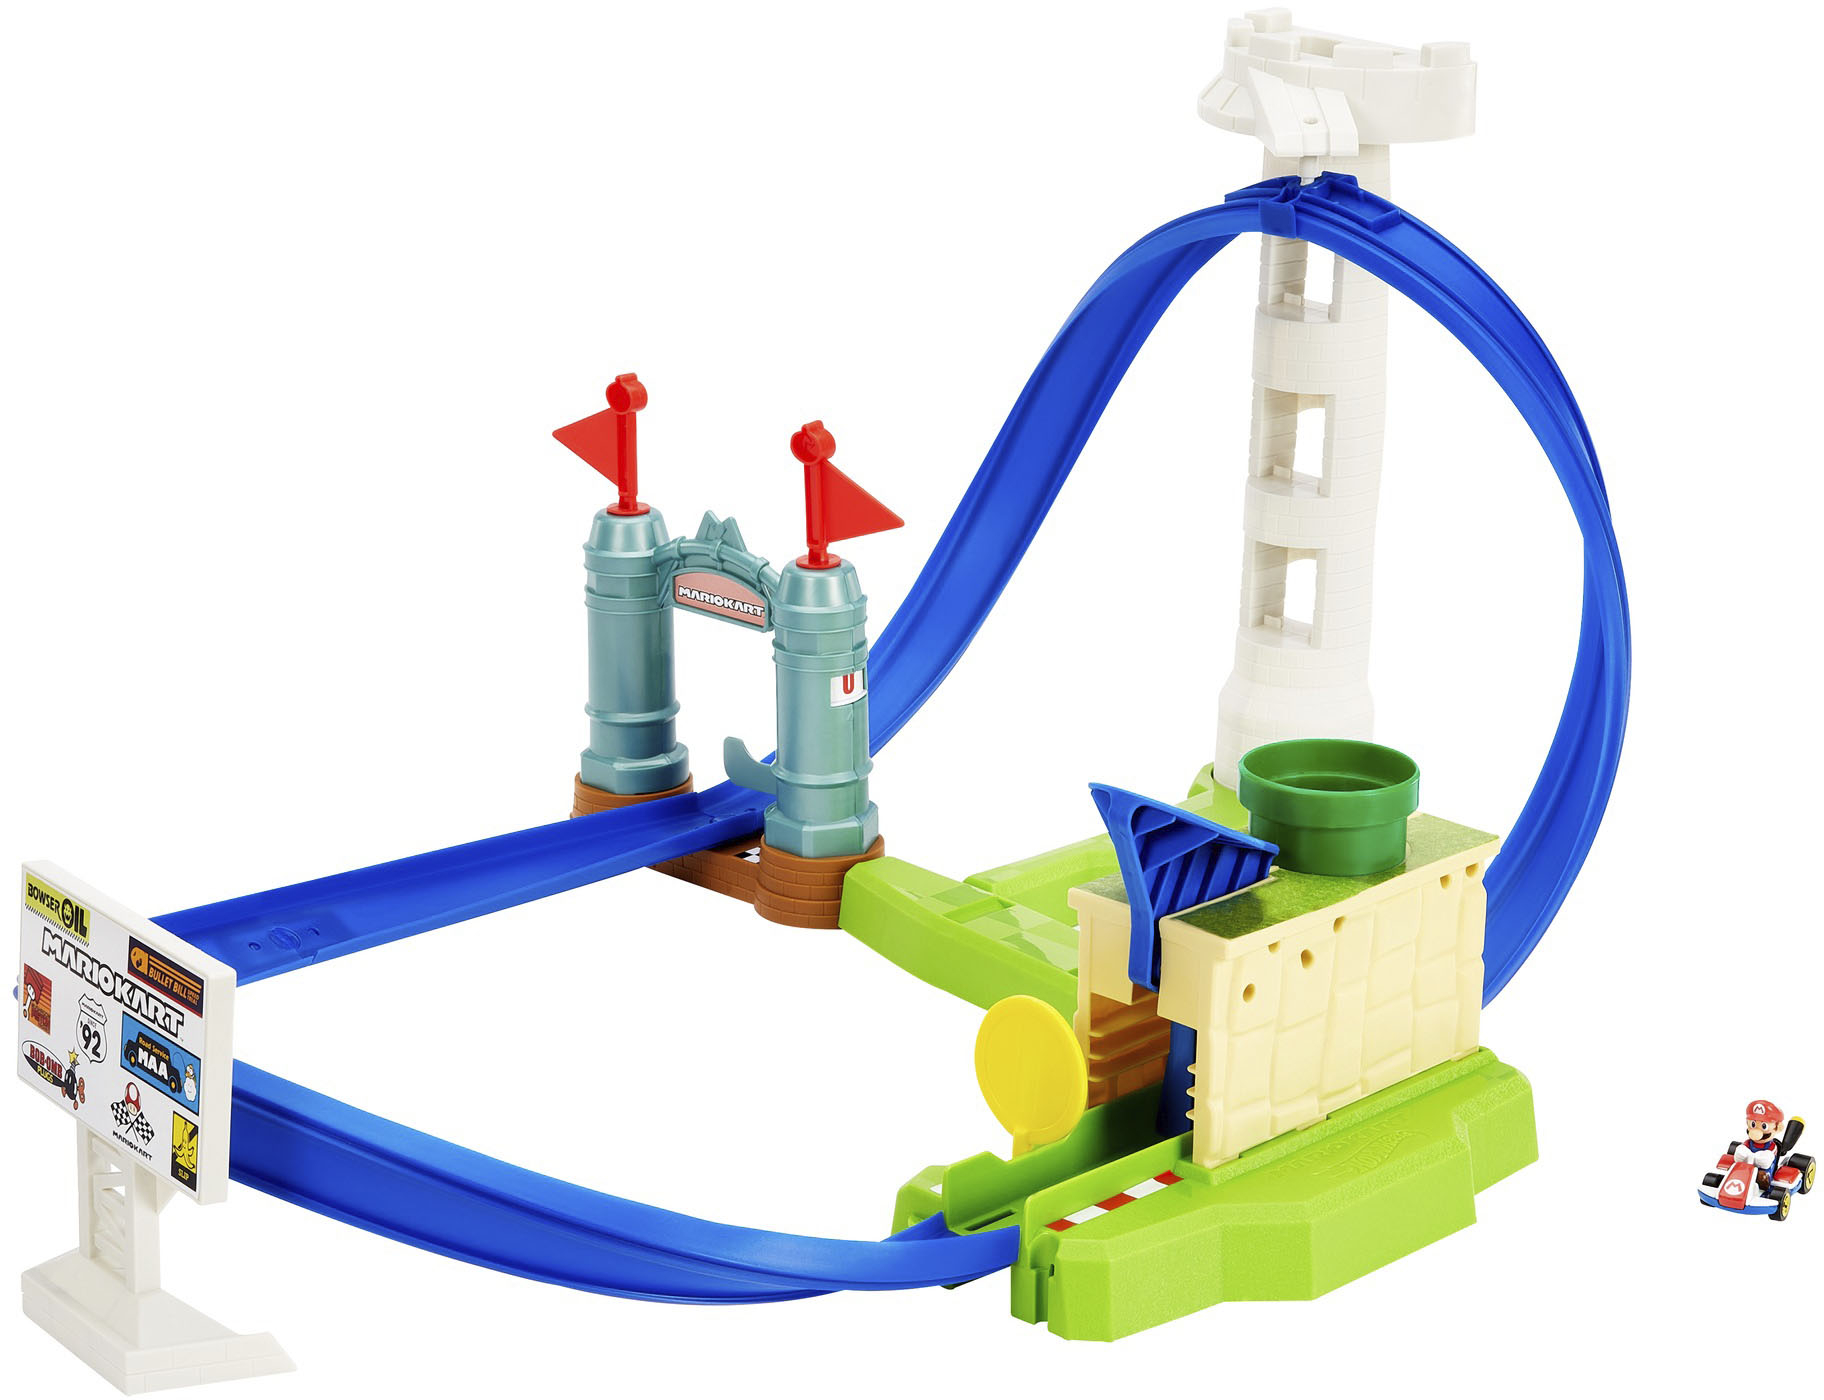 Make Your Own High-Speed Race Tracks With the Hot Wheels Mario